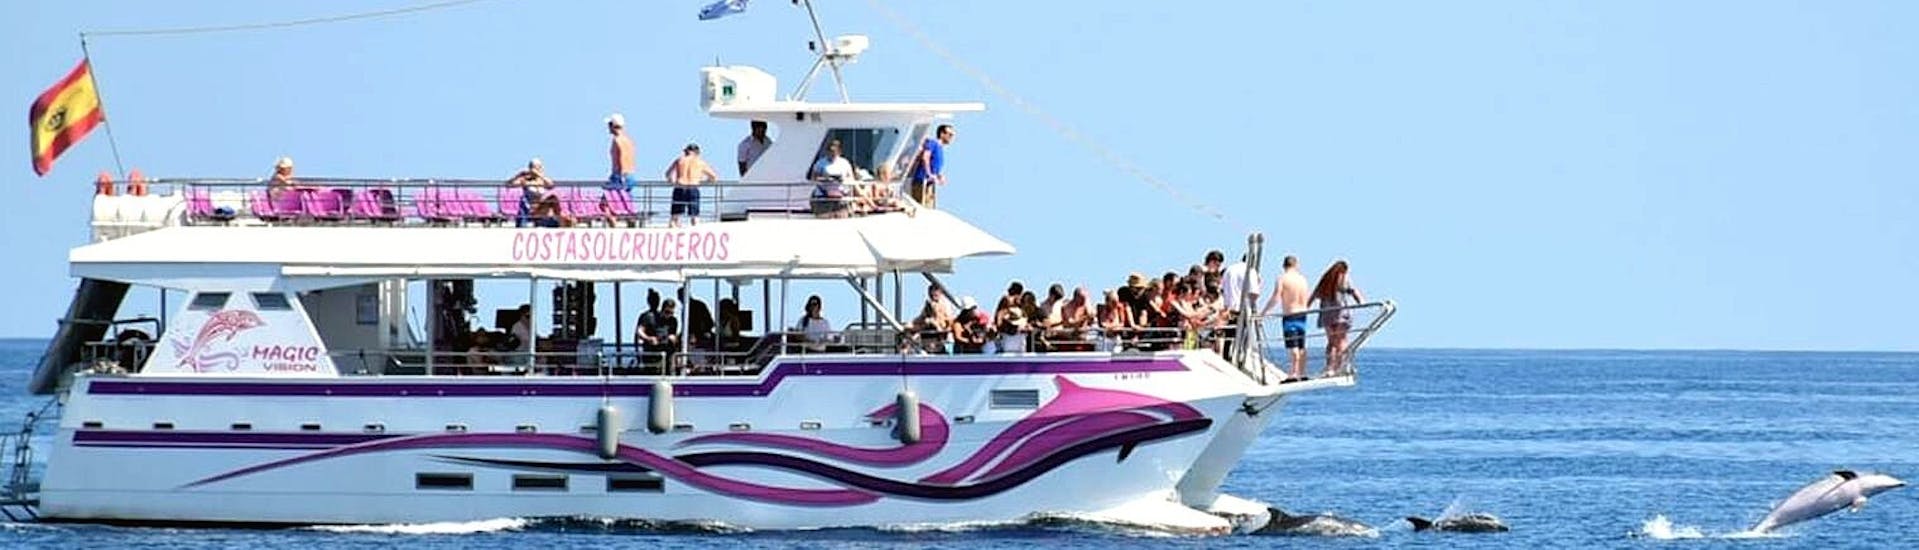 The Magic Vision catamaran cruising on the bay of Benalmadena with participants having fun on board, during a catamaran boat trip in Benalmádena with dolphin watching with Costasol Cruceros.